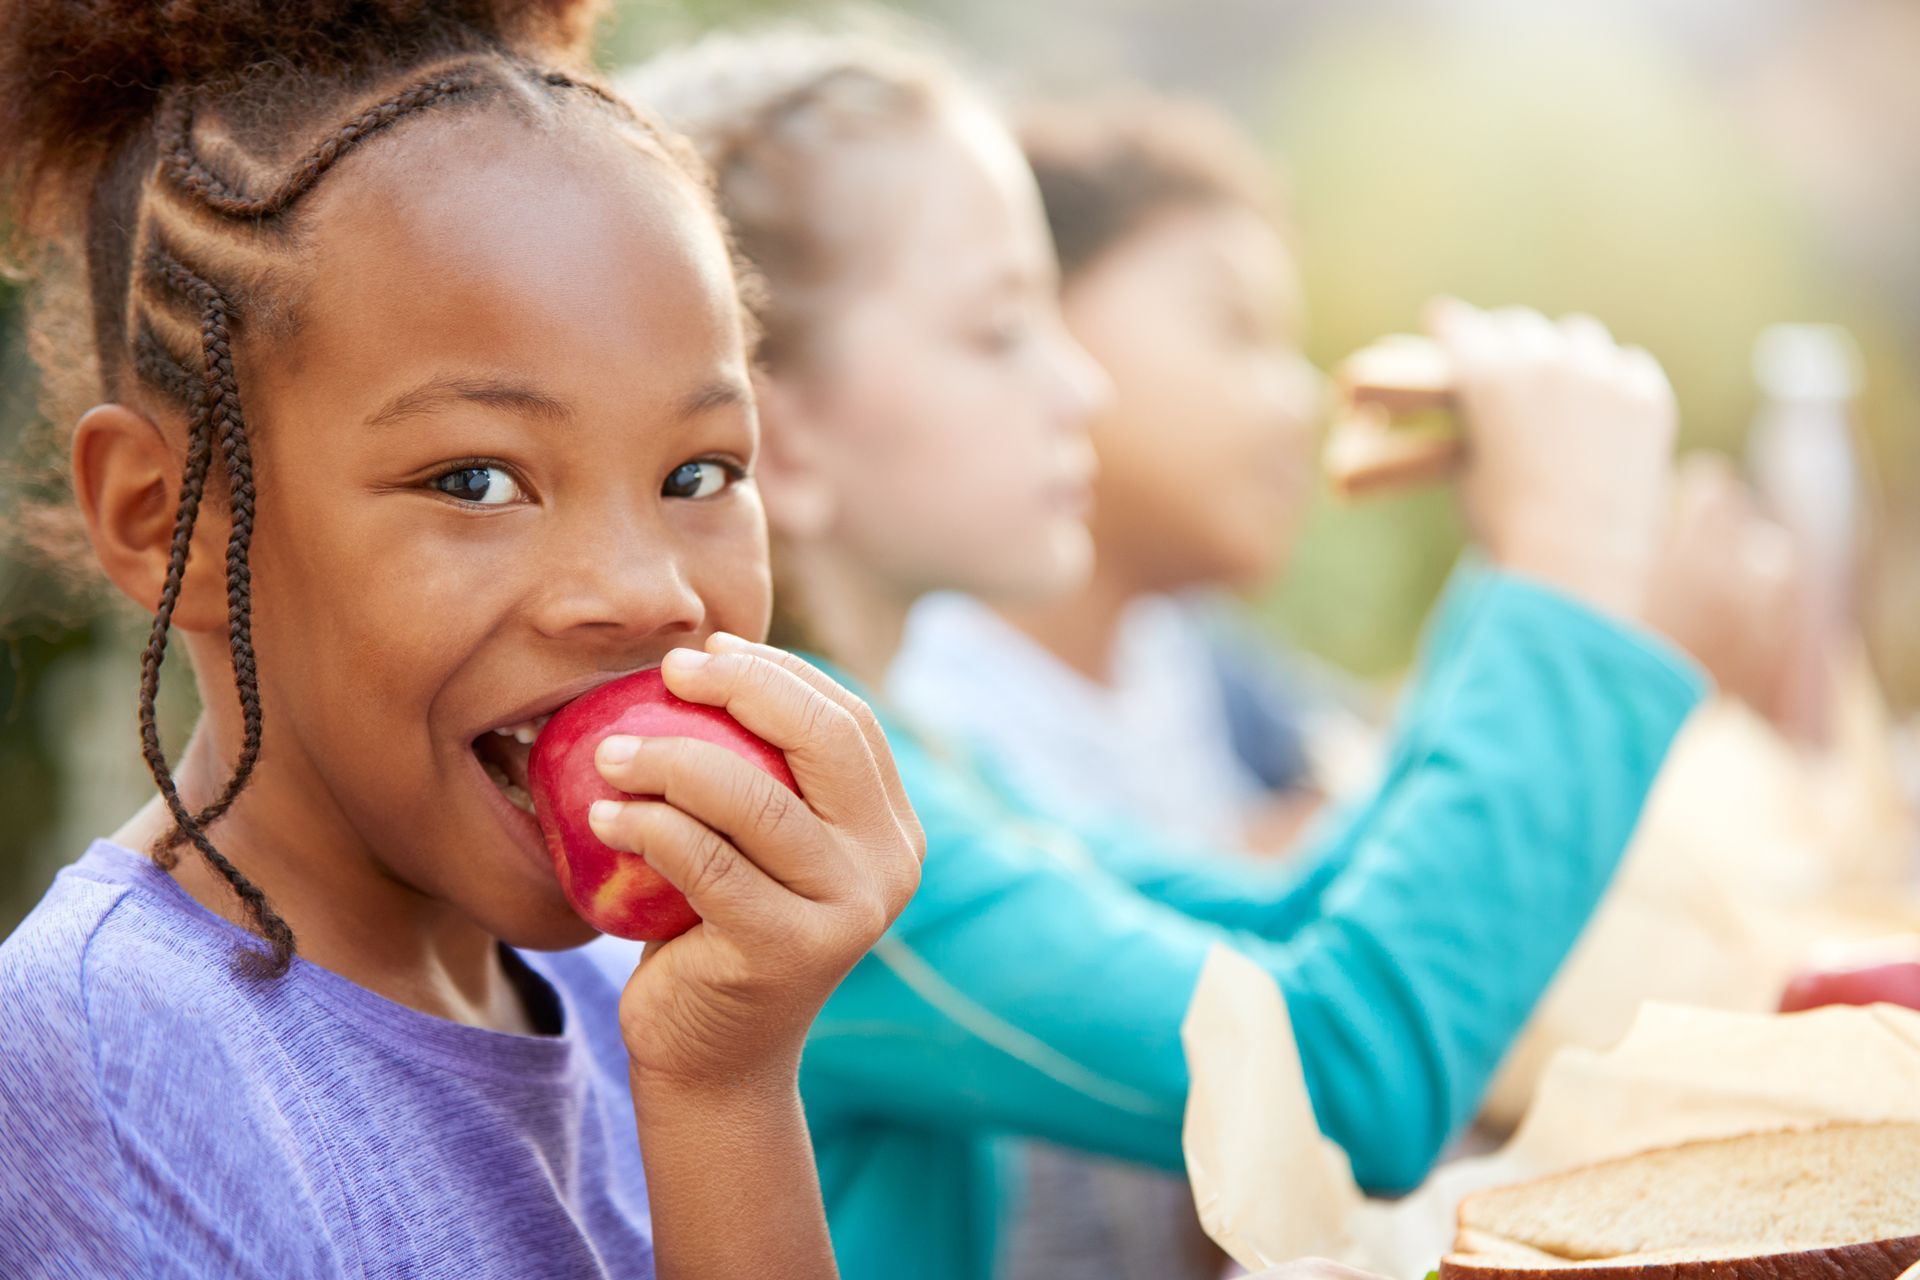 Girl sitting at a lunch table with other children and biting into a red apple